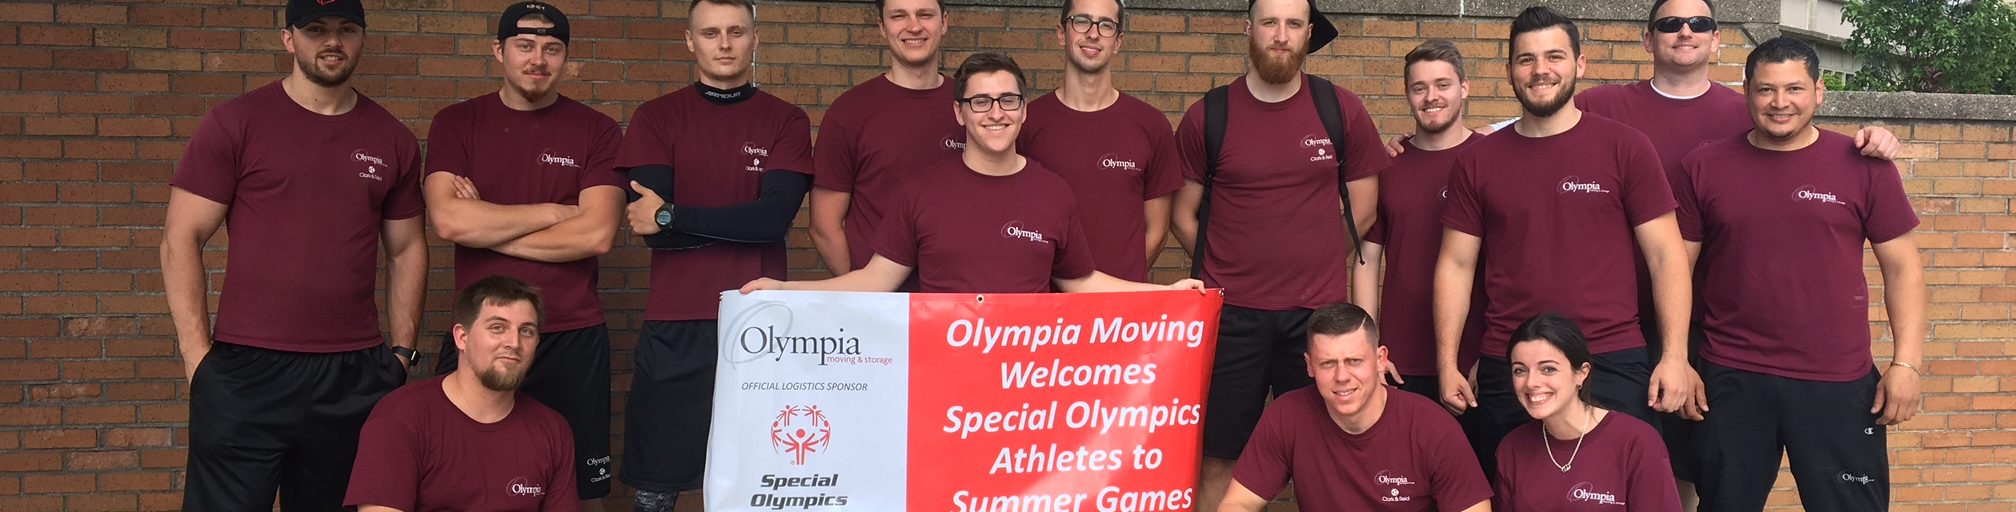 Olympia Moving Team Picture at special olympics